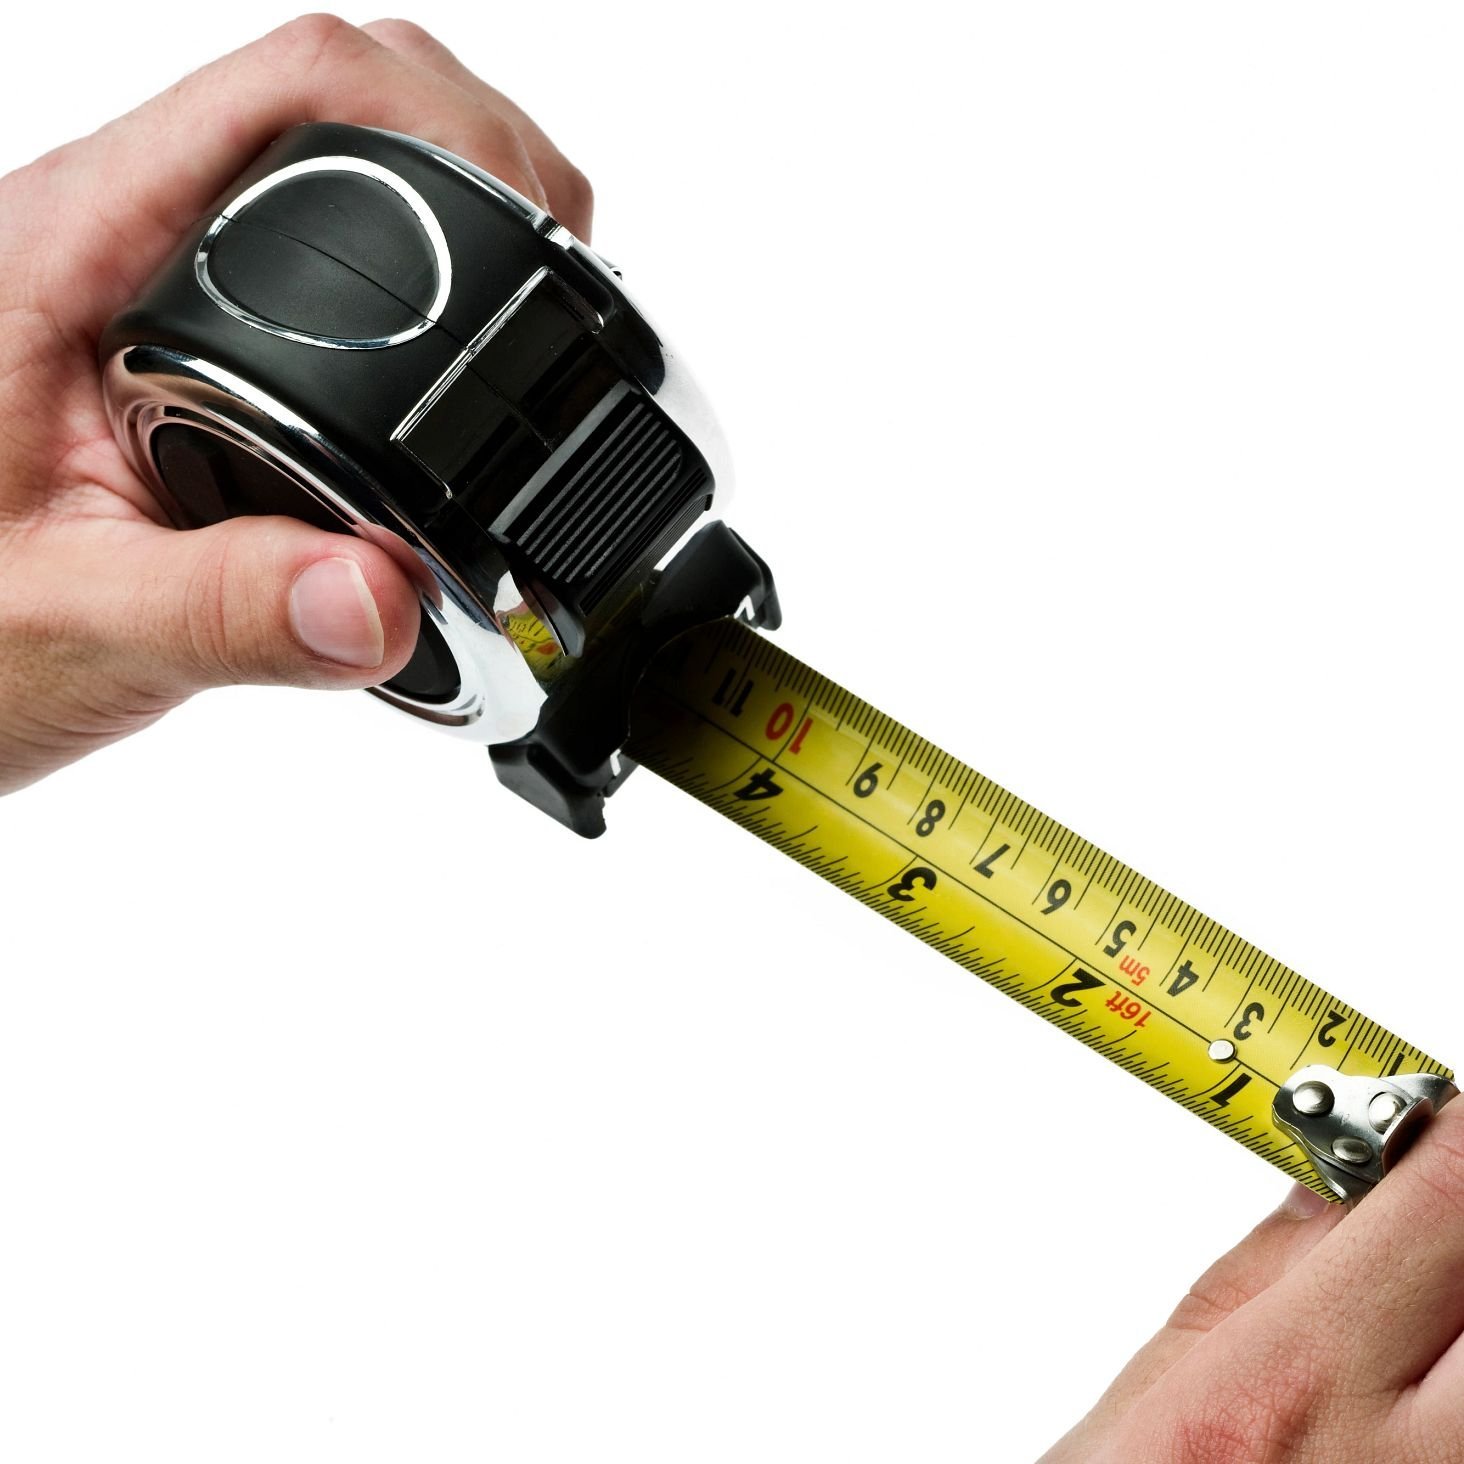 Measuring tool from Carpet World Flooring in Canyon